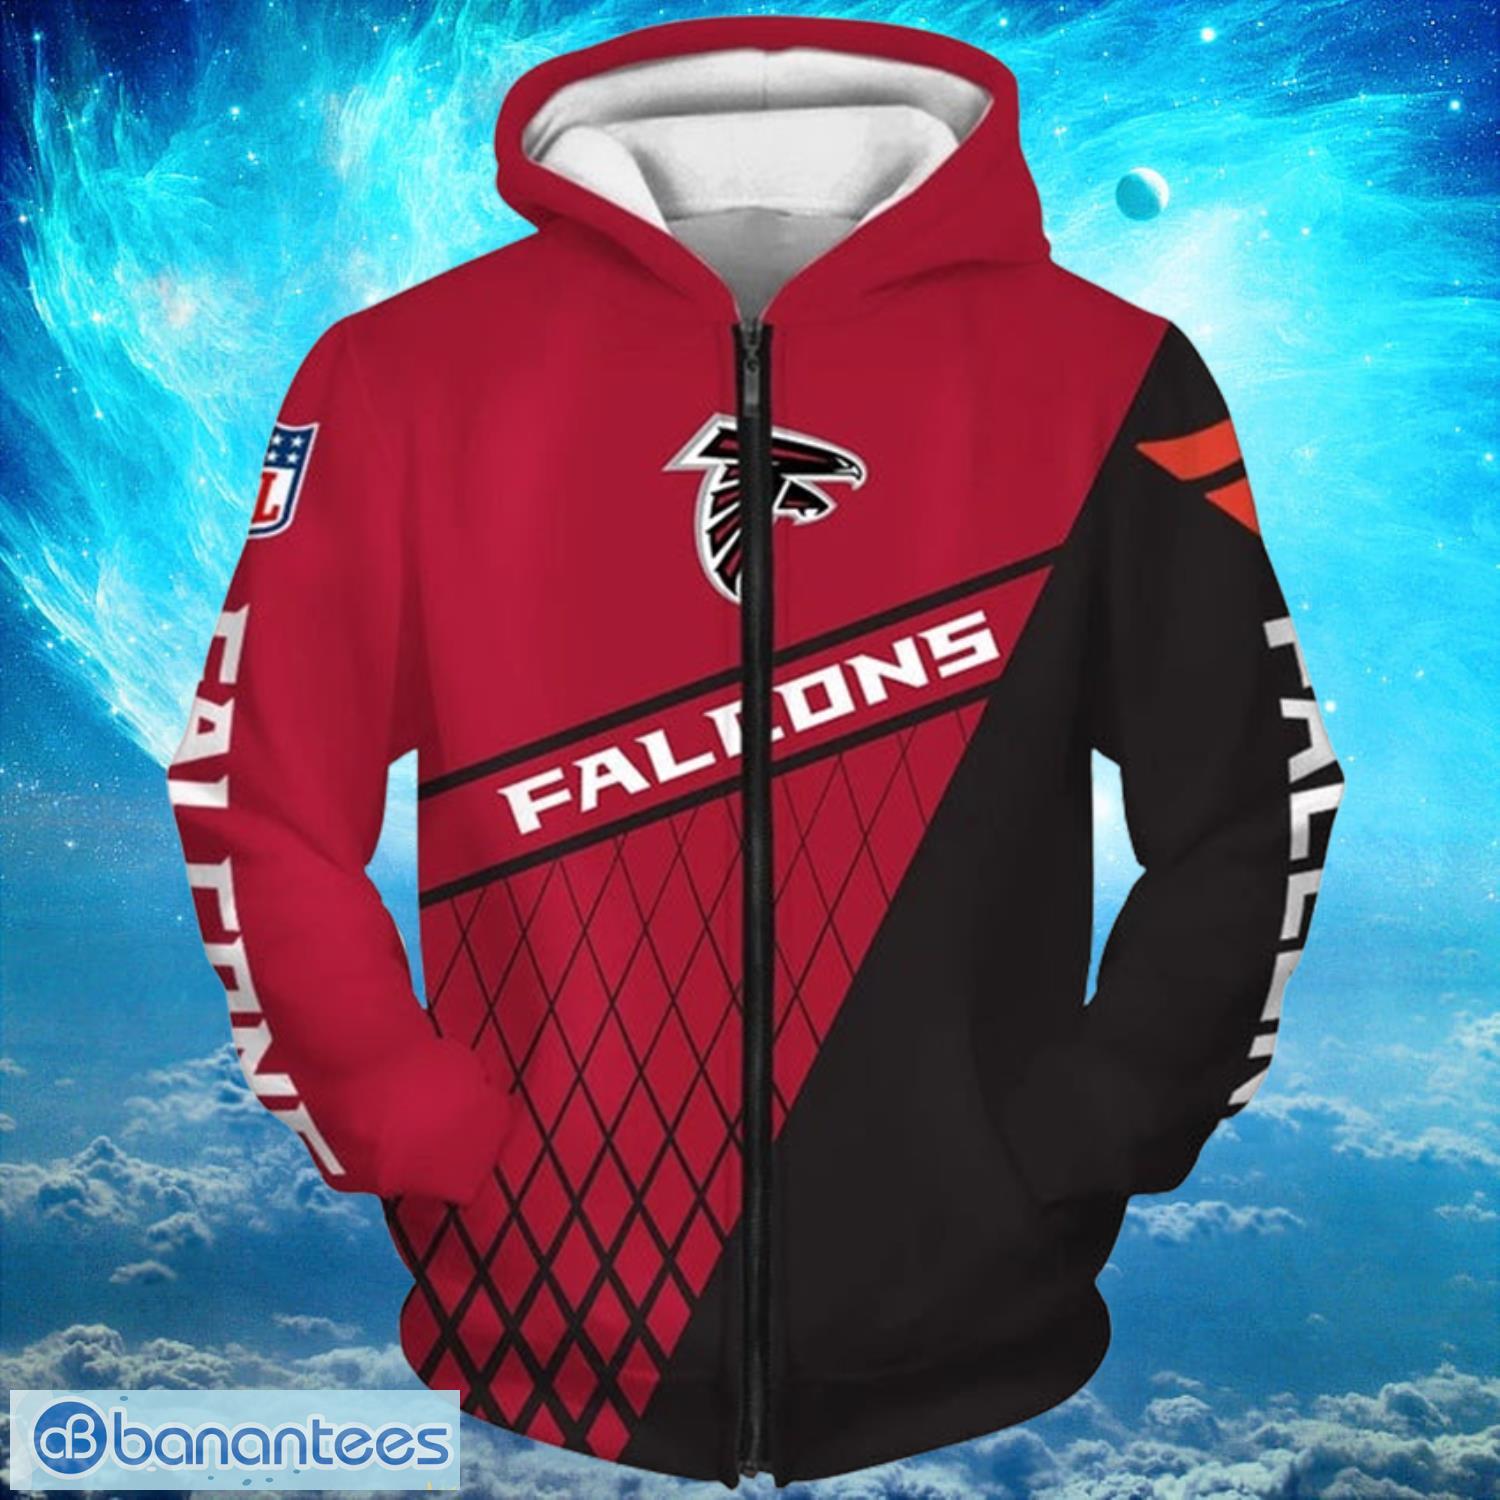 Atlanta Falcons Zip Up Red Background Hoodies Full Over Print Product Photo 1